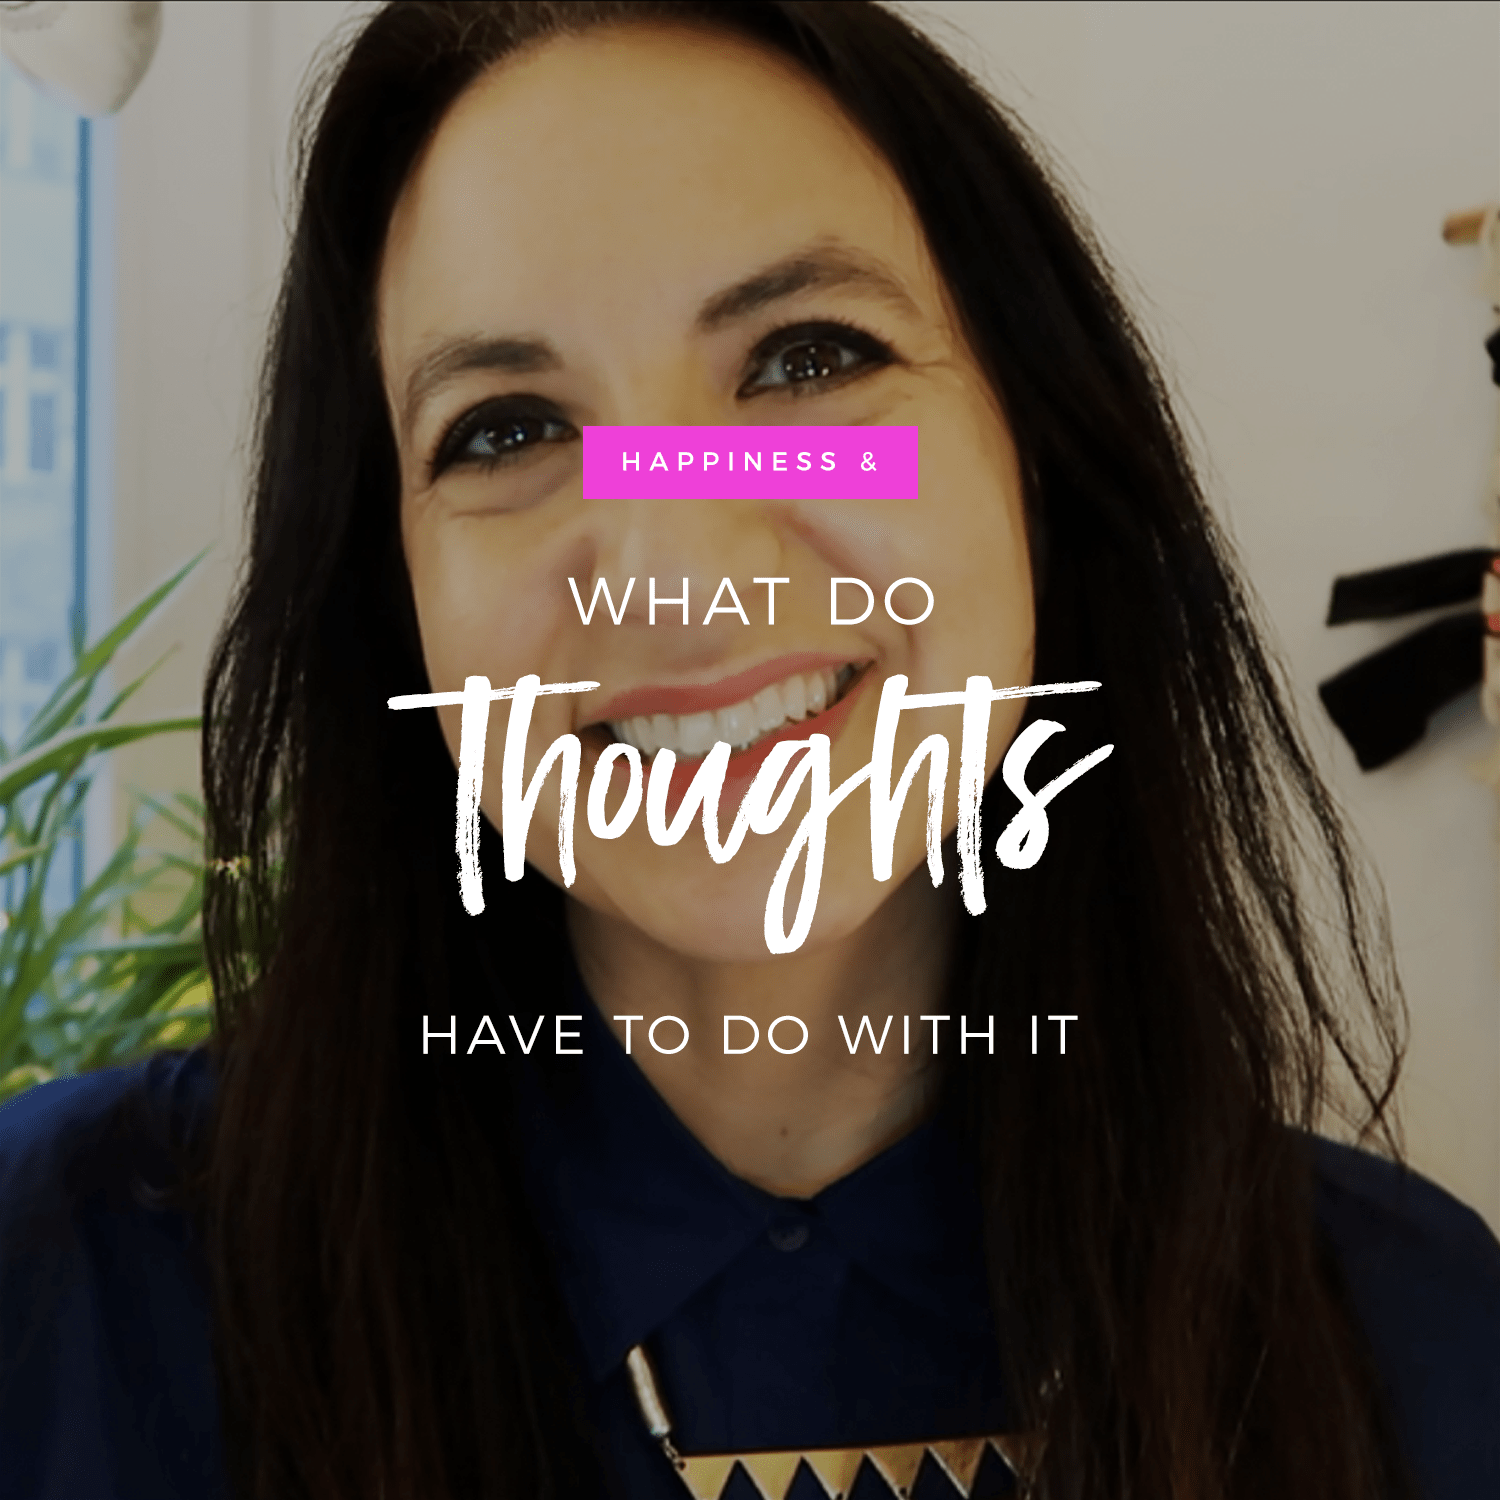 Happiness & What Your Thoughts Have To Do With It